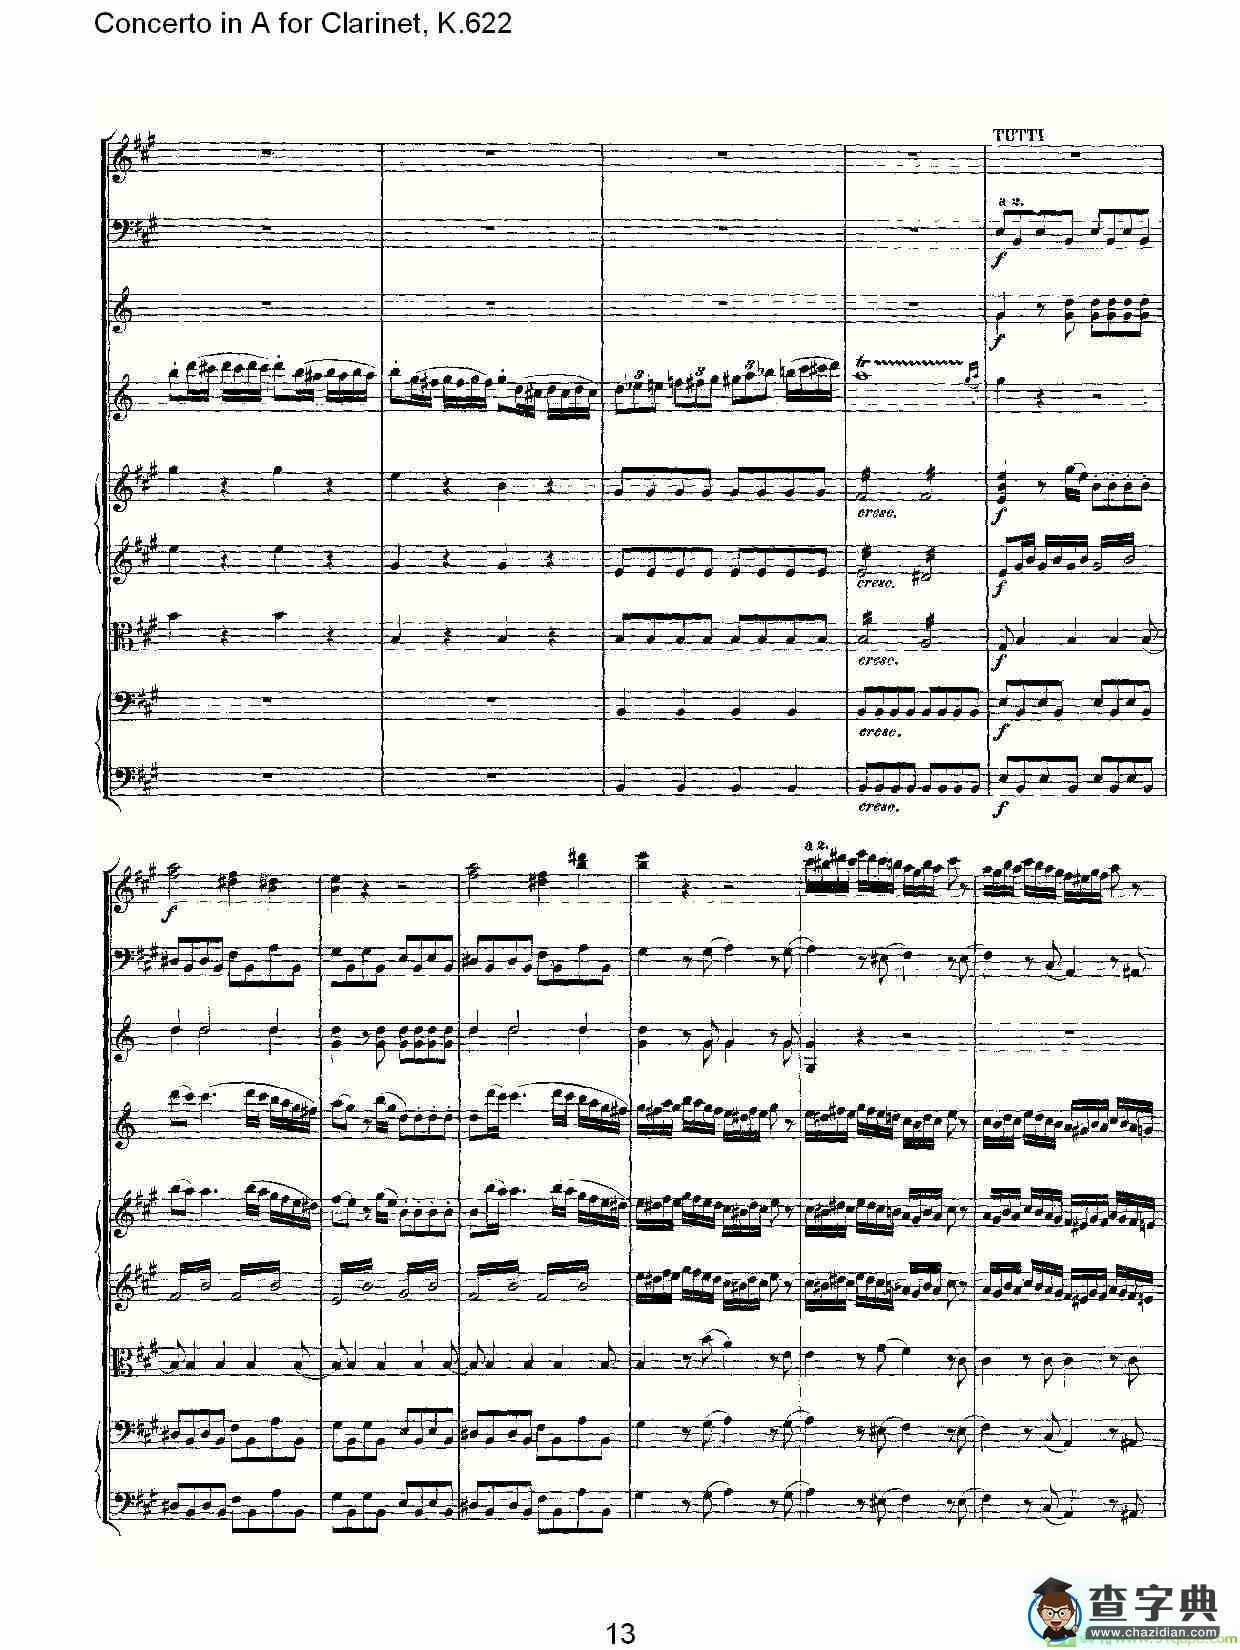 Concerto in A for Clarinet, K.622简谱